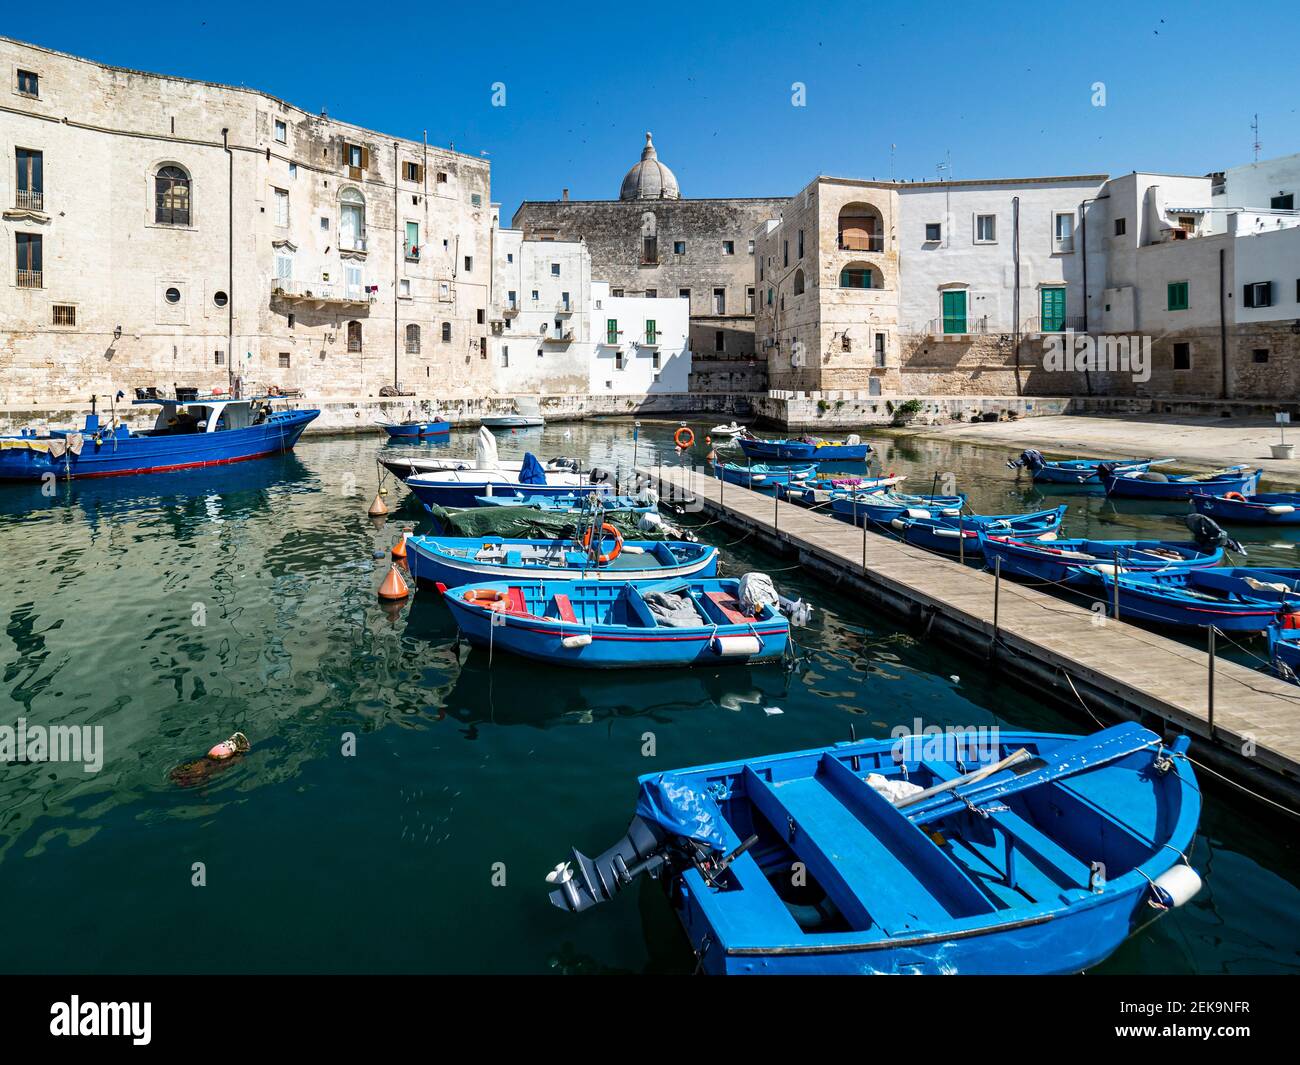 Blue boat moored in canal by buildings on sunny day at Monopoli, Apulia, Italy Stock Photo